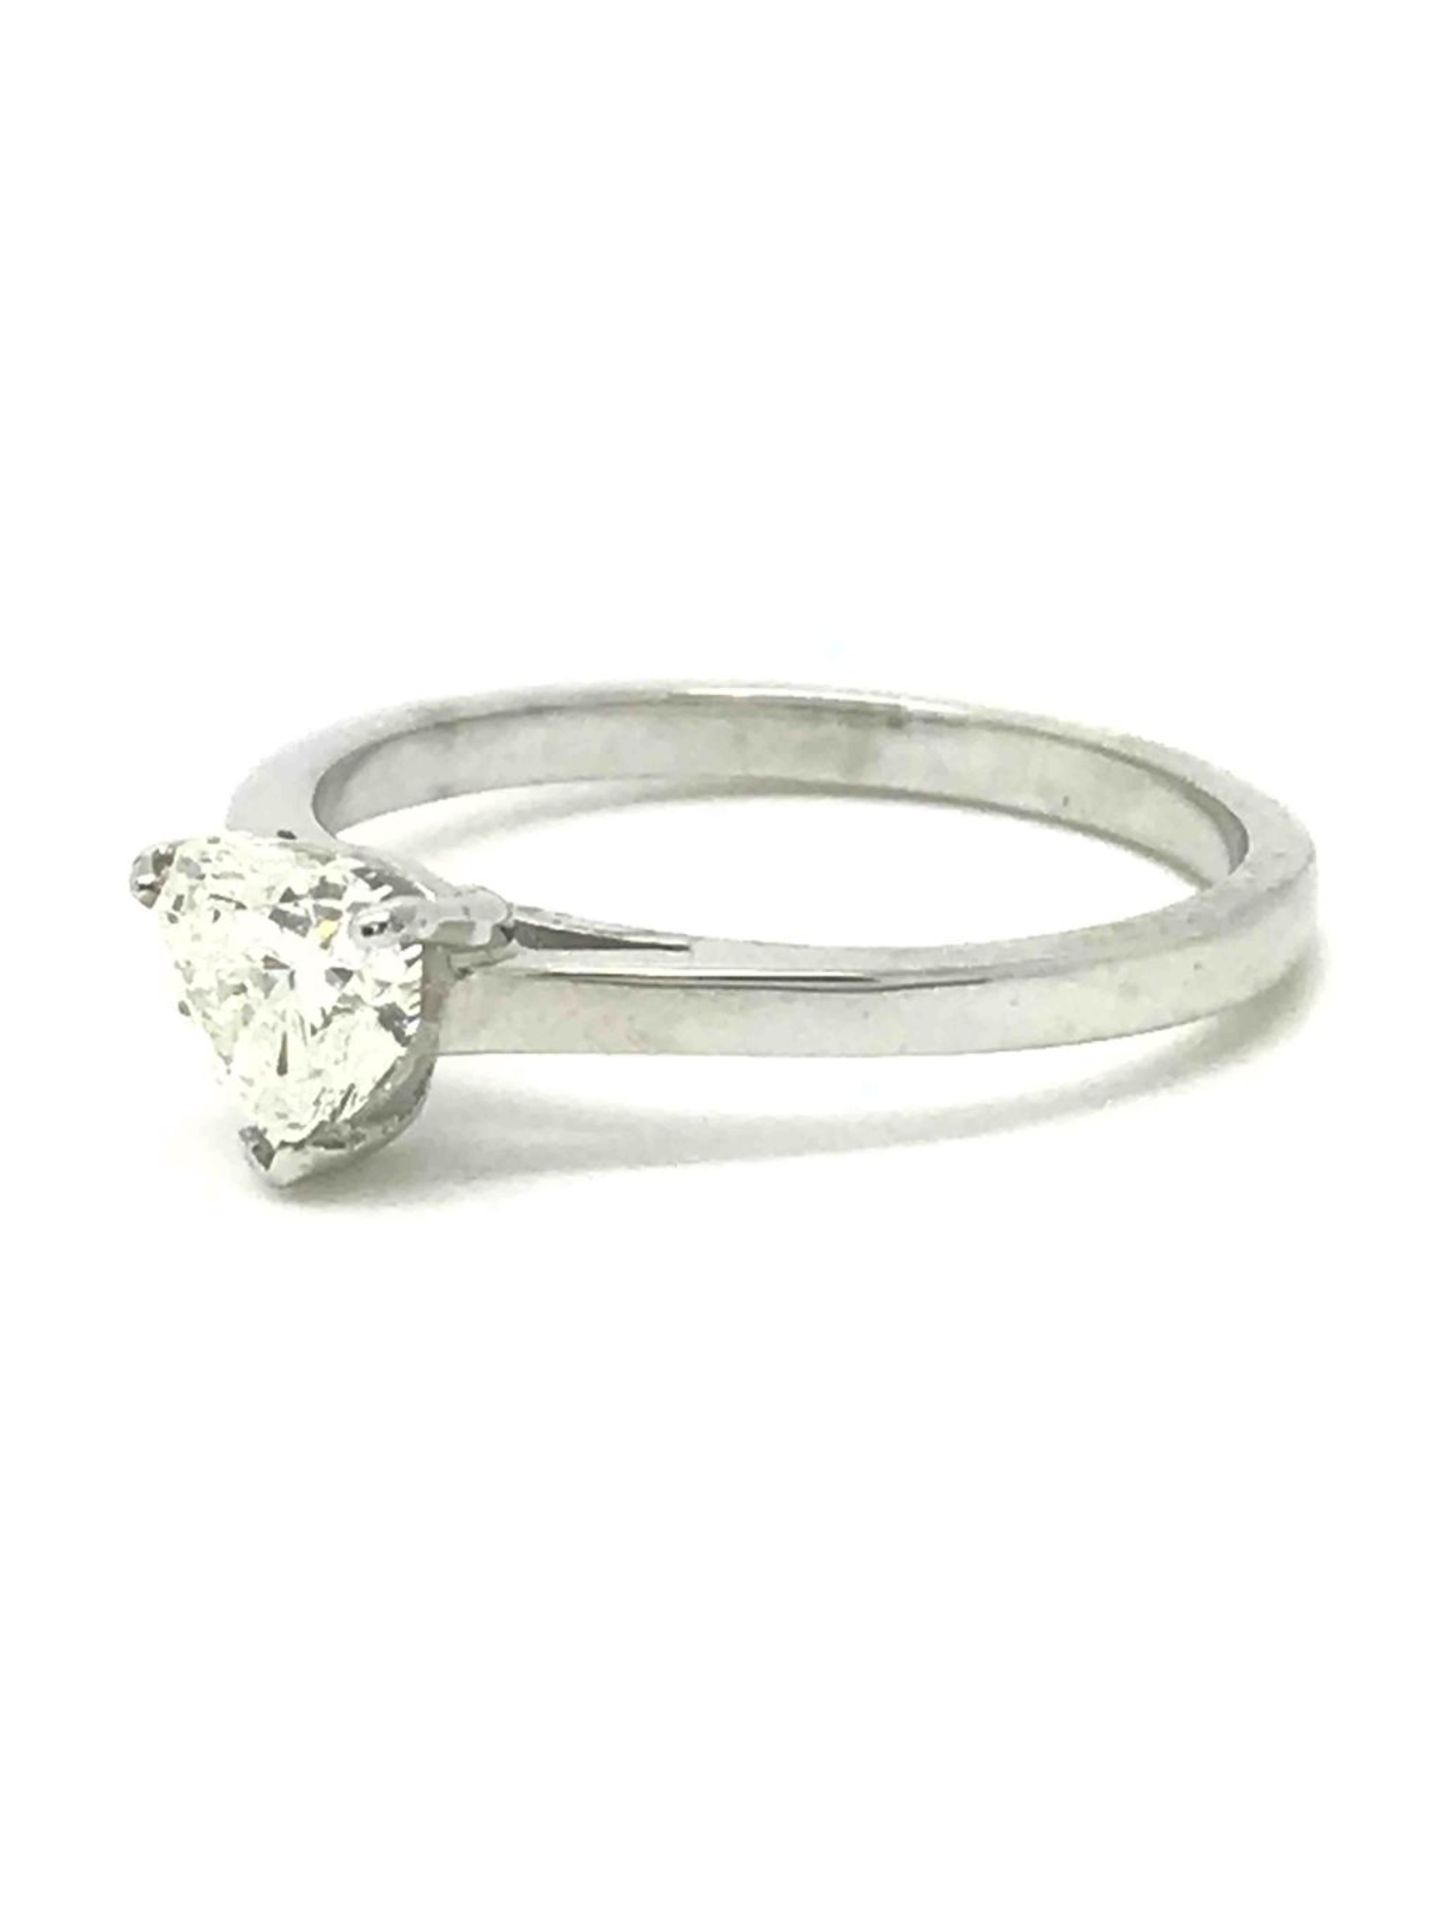 Certificated 0.72ct Heart Shaped Diamond Single Stone Ring - Image 2 of 4